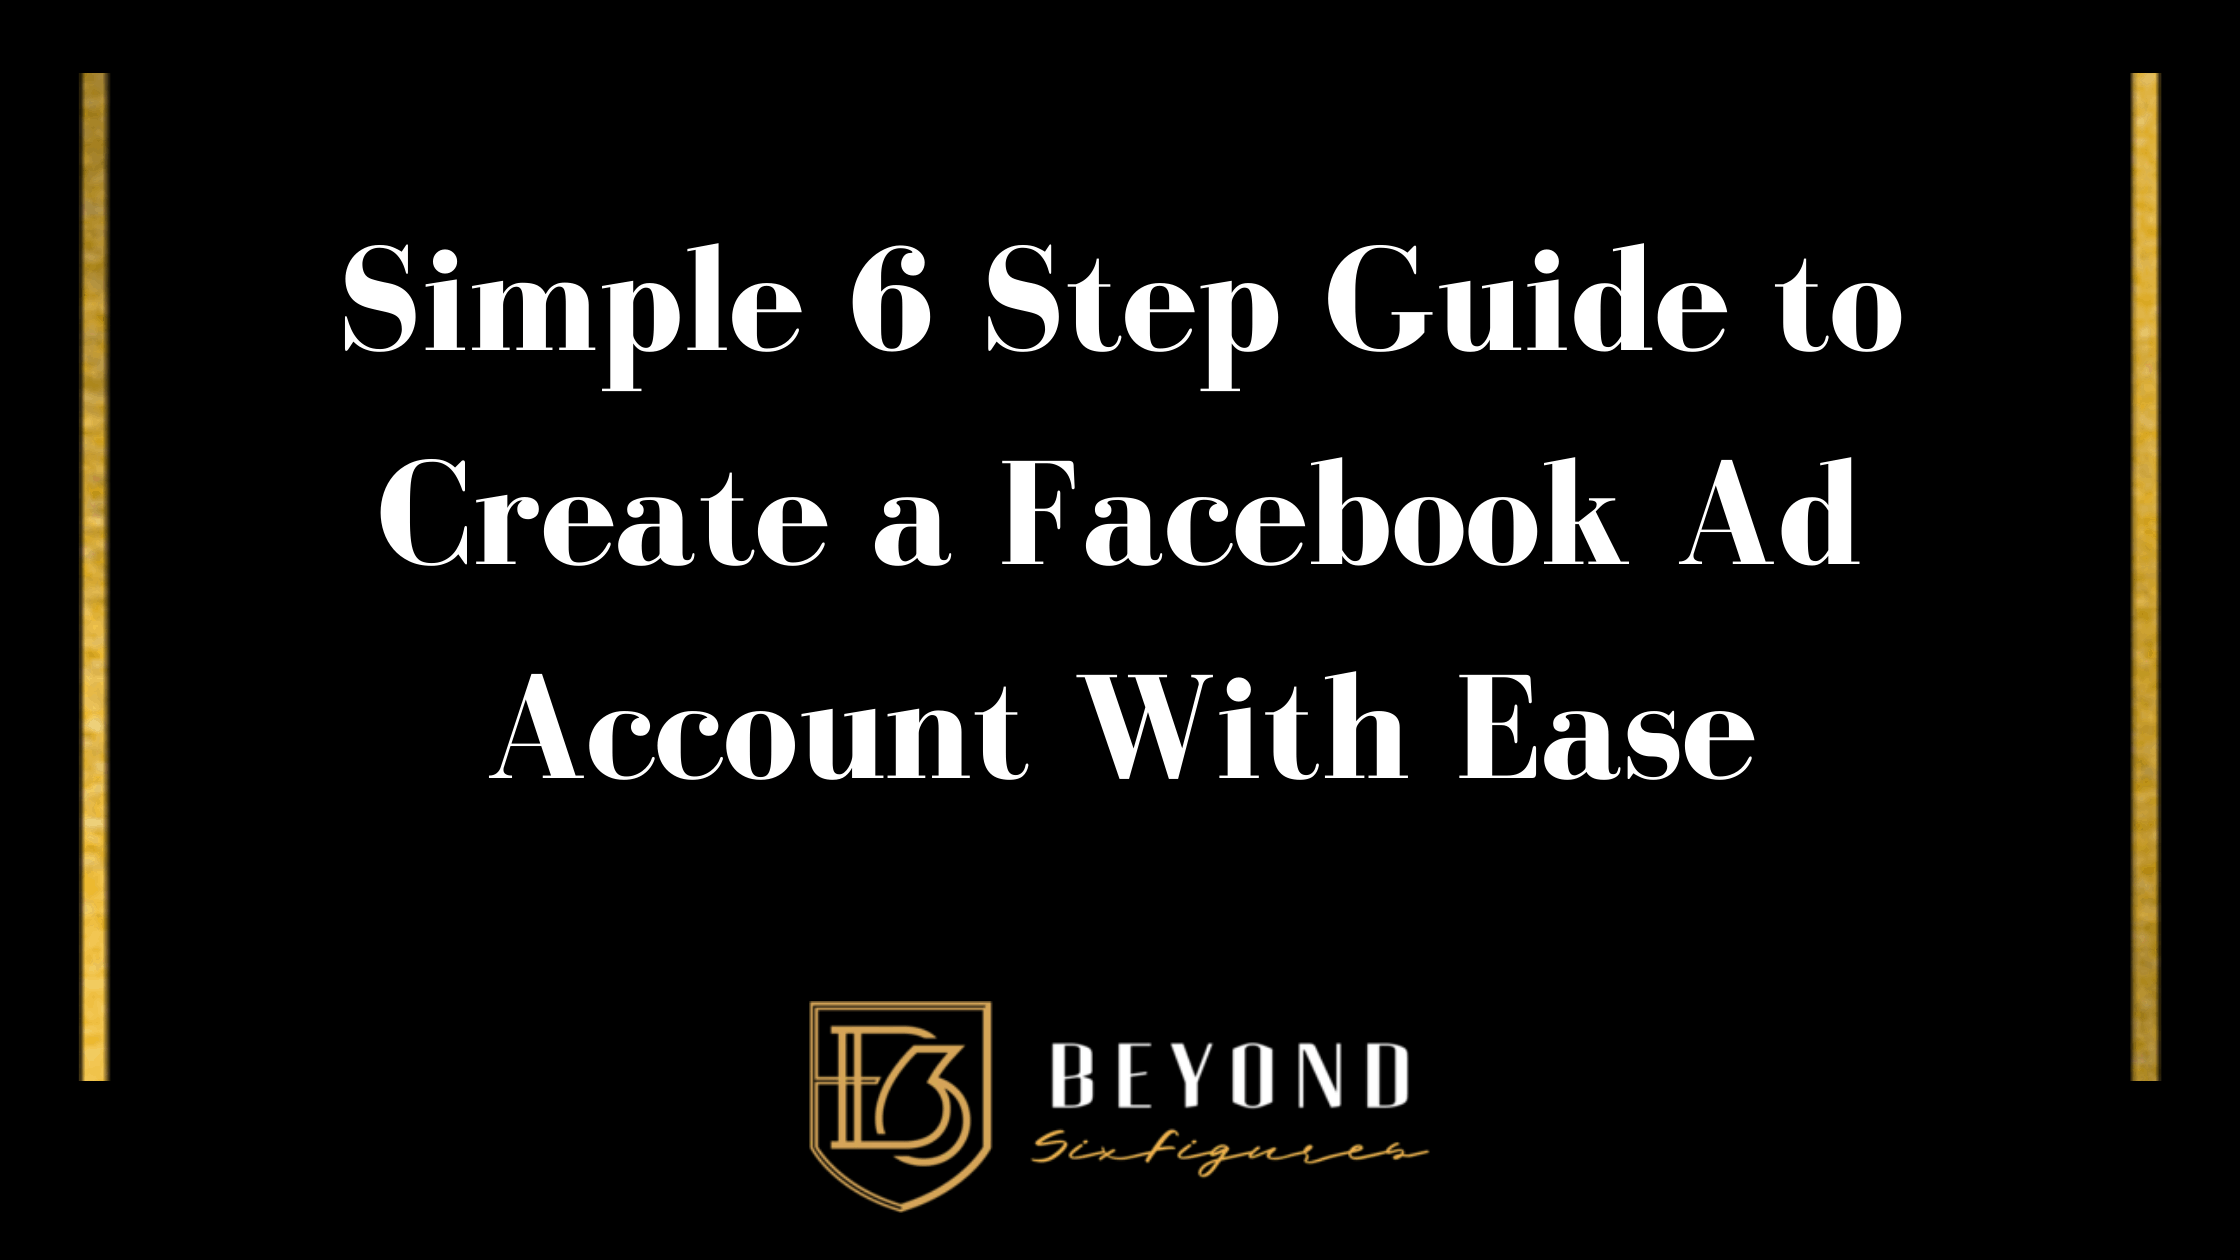 Blog banner for: Simple 6 Step Guide to Create a Facebook Ad Account With Ease